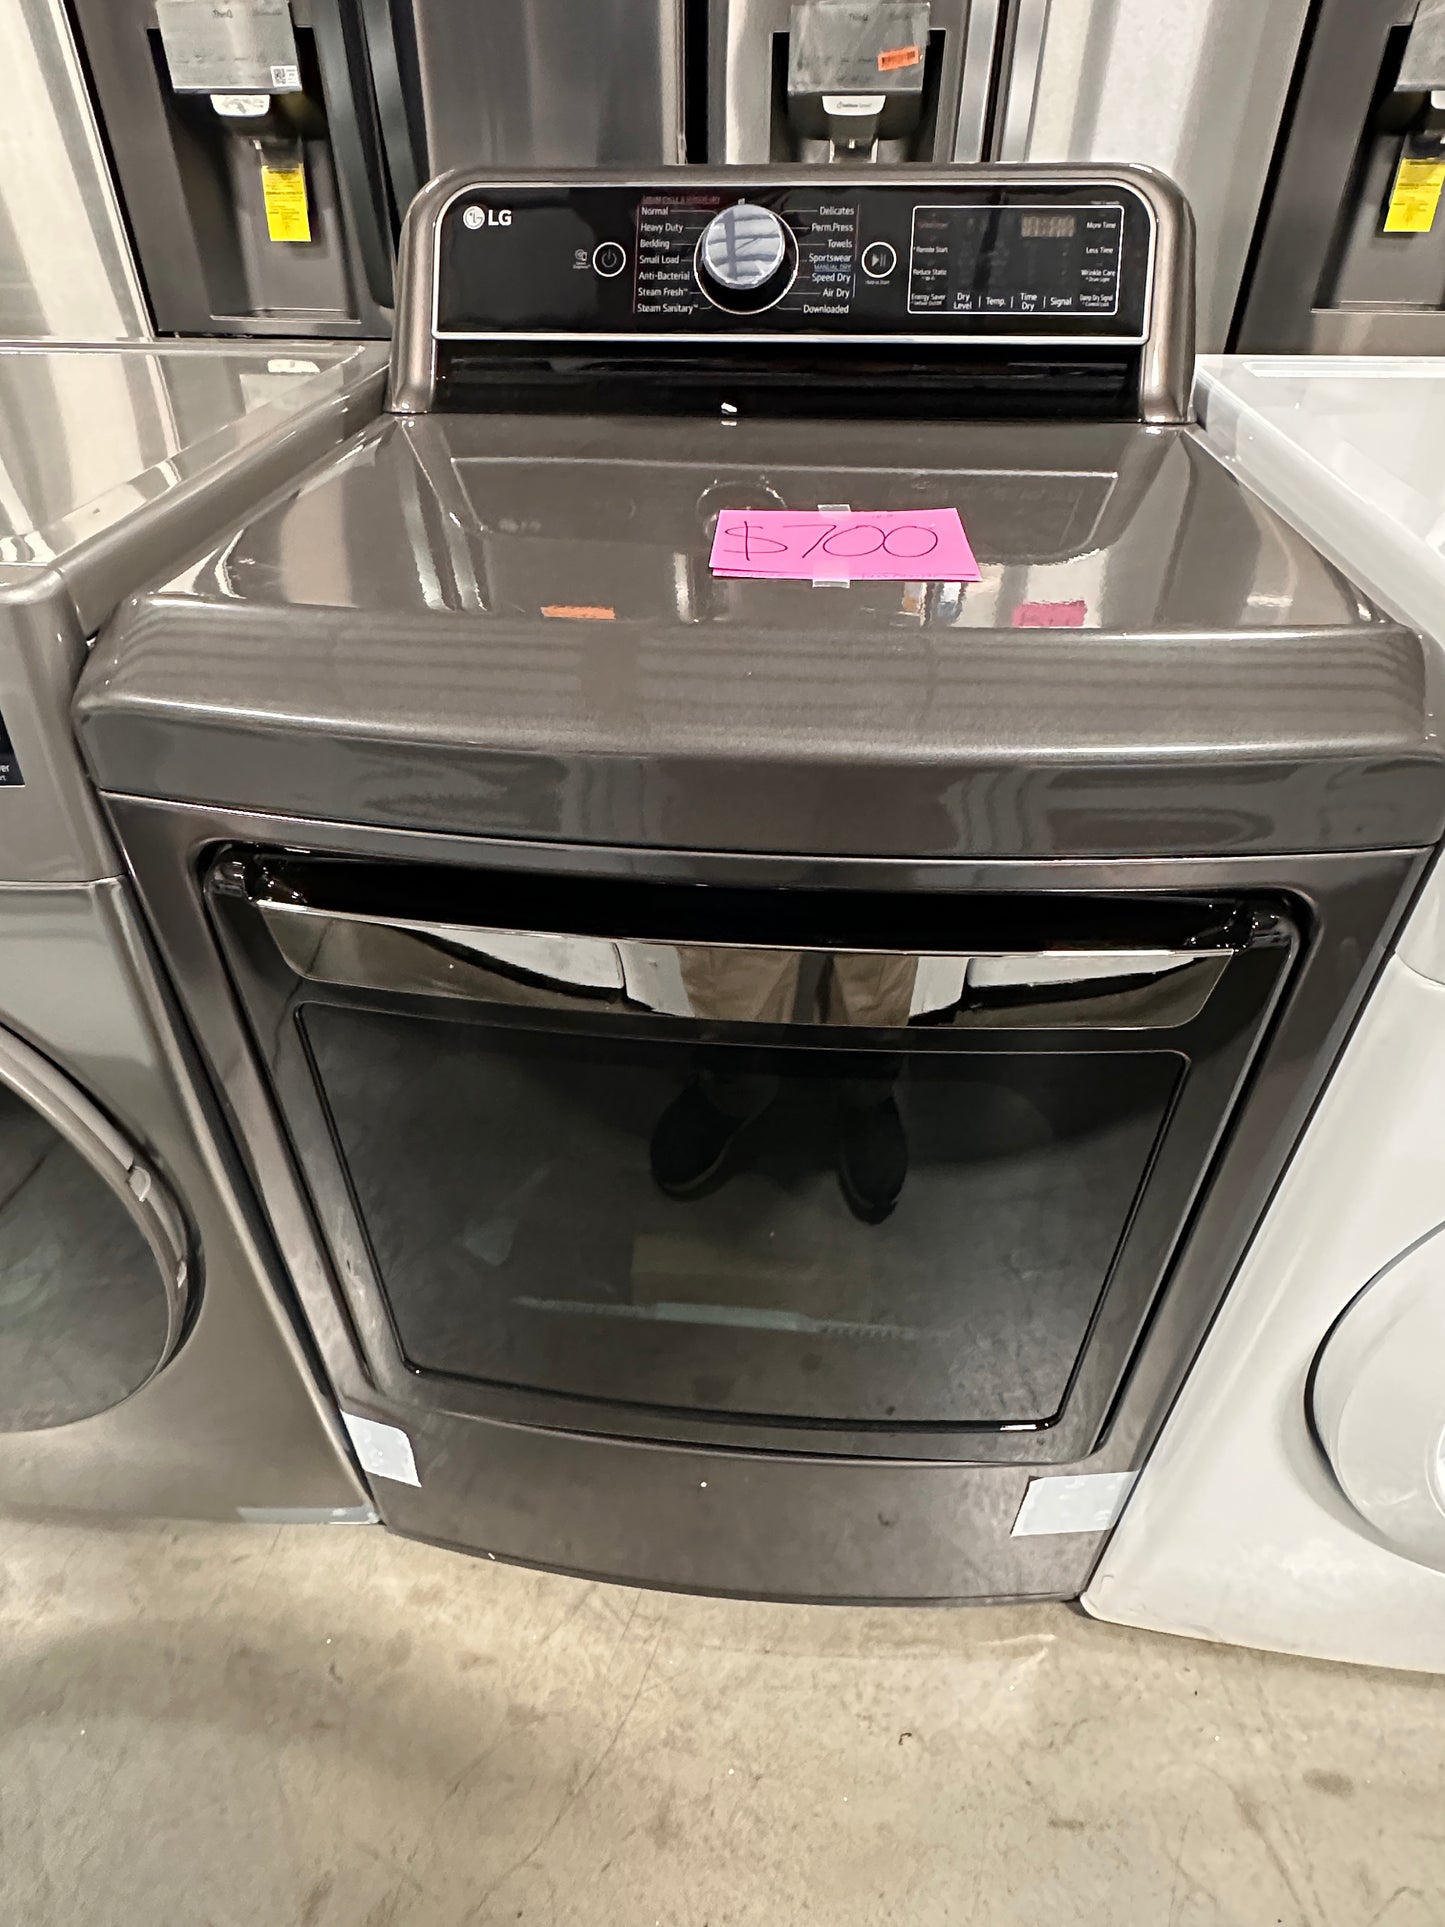 GREAT NEW LG 7.3 CU FT ELECTRIC DRYER - DRY12125 DLEX7900BE